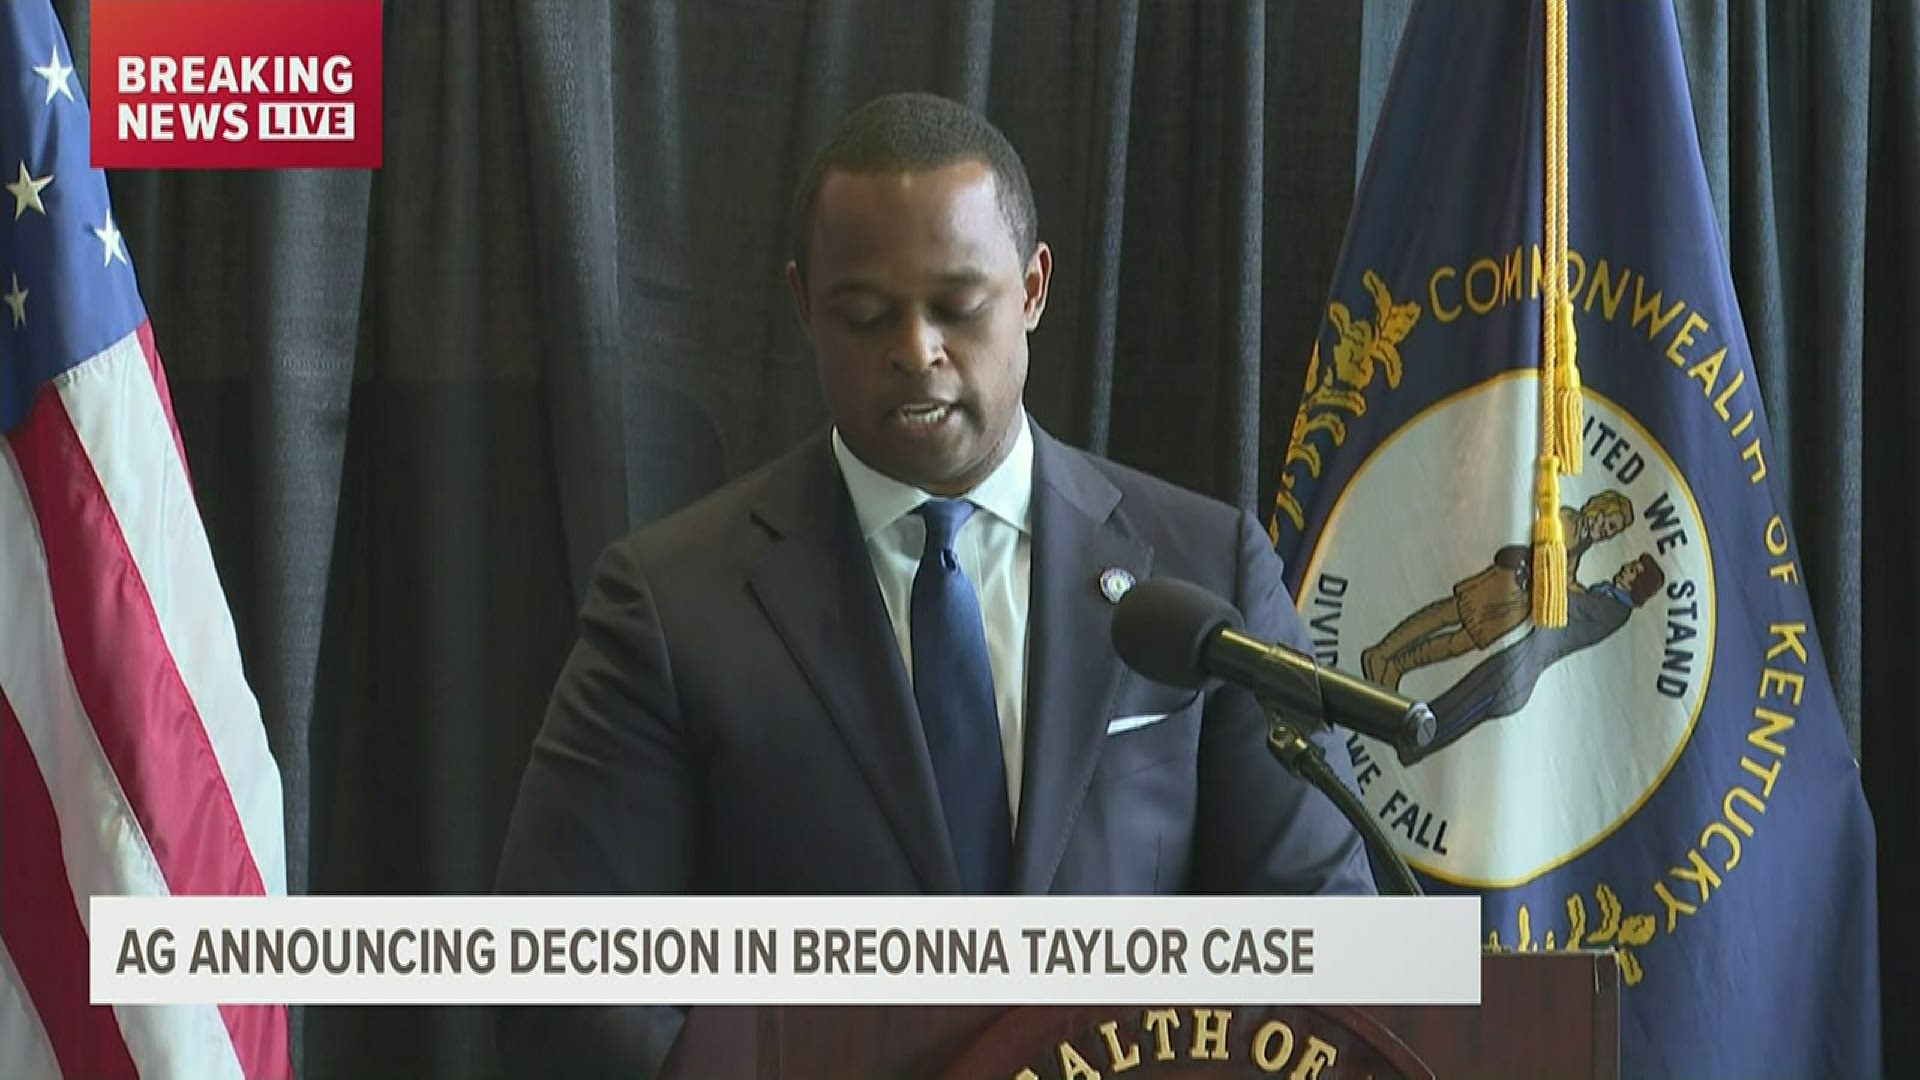 Kentucky Attorney General Daniel Cameron explains the wanton endangerment charge in the Breonna Taylor investigation. Louisville officer Brett Hankison was charged.